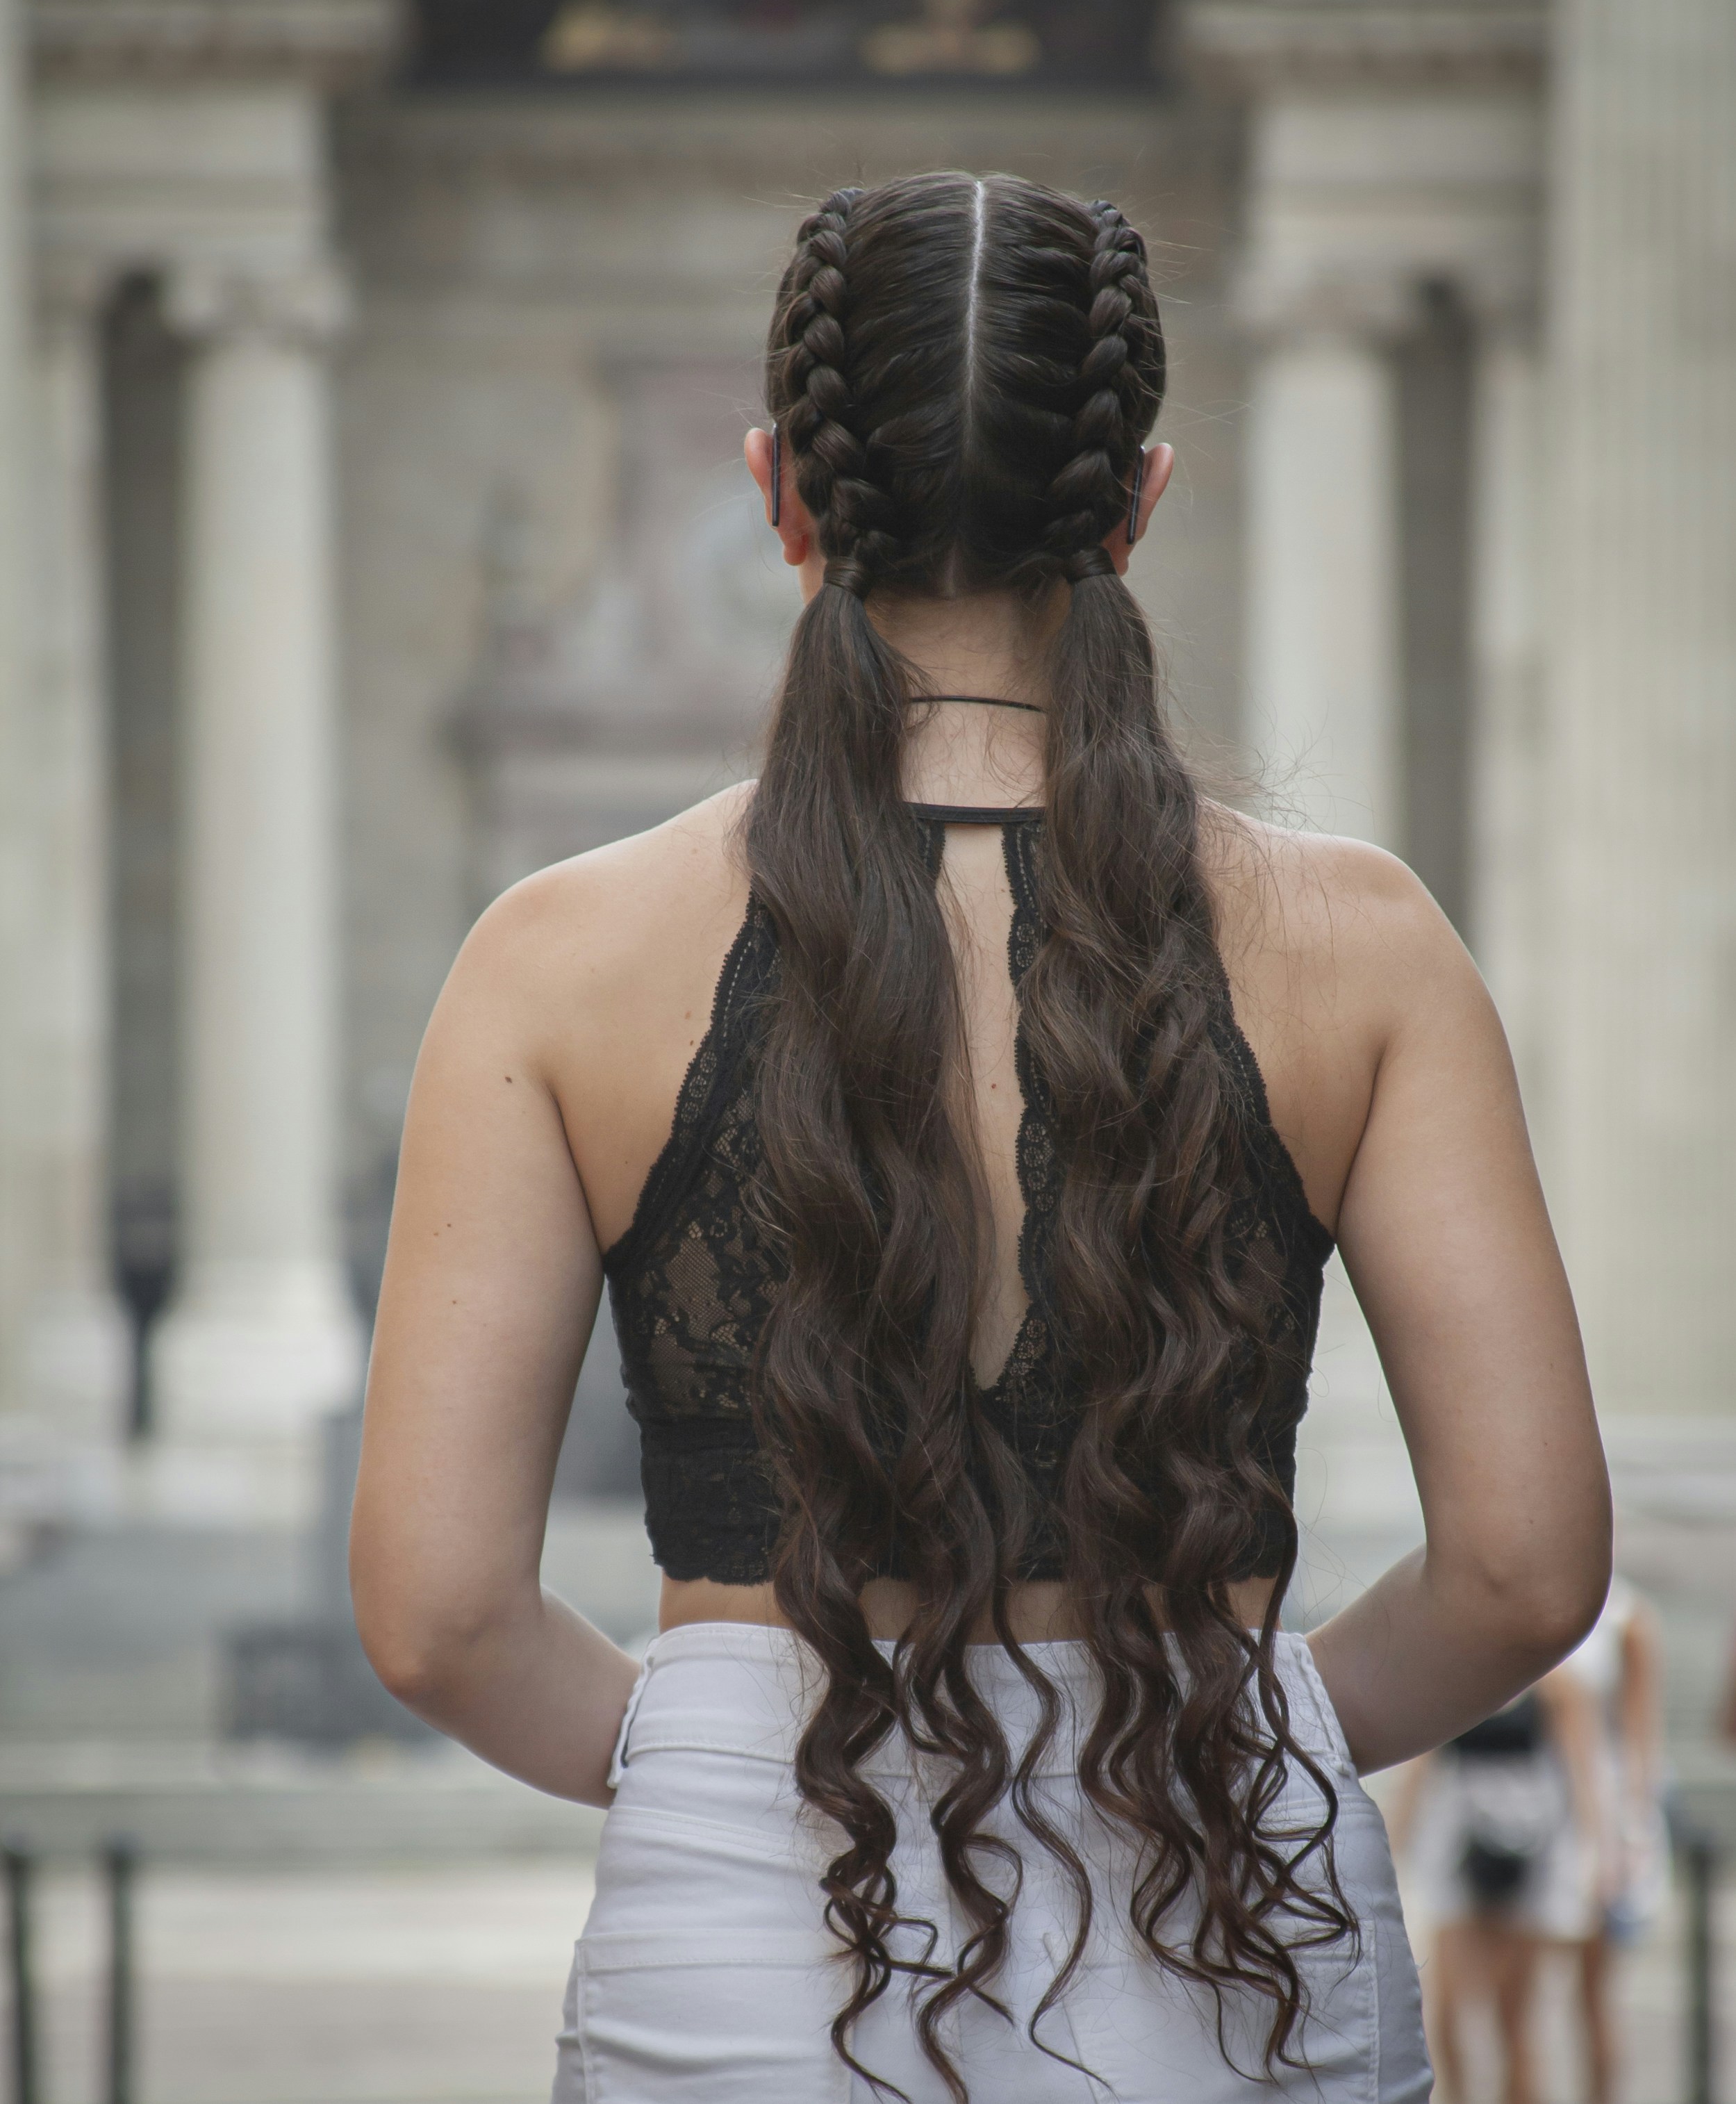 11 Cool Ideas For Bohemian Hair That You Want To Try - web-stories